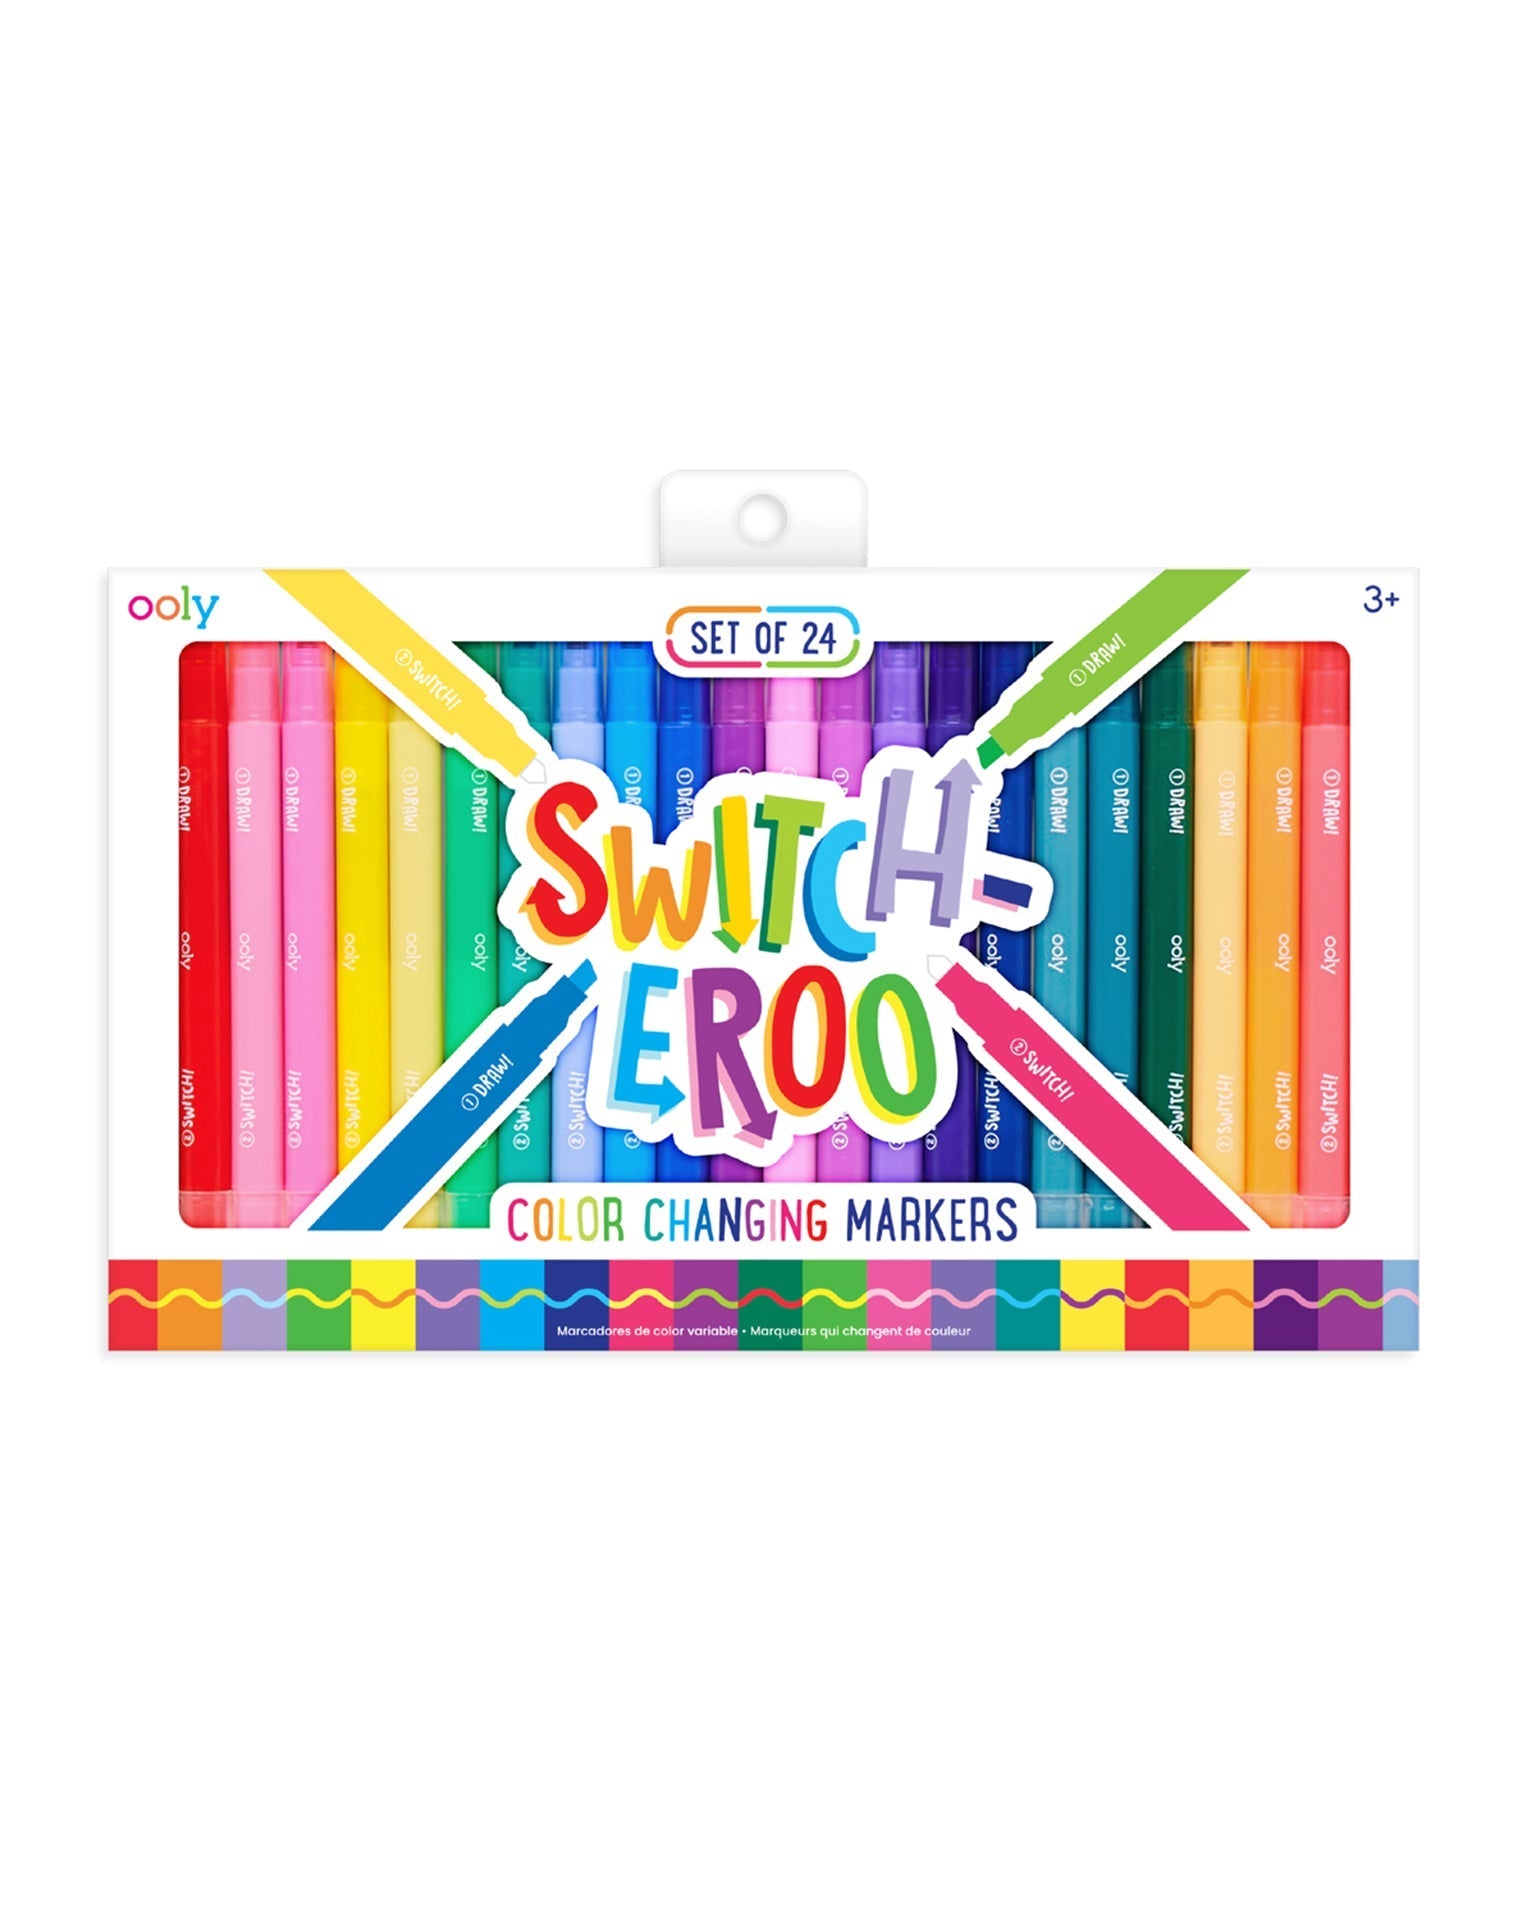 Little ooly play switch-eroo color changing markers set of 24